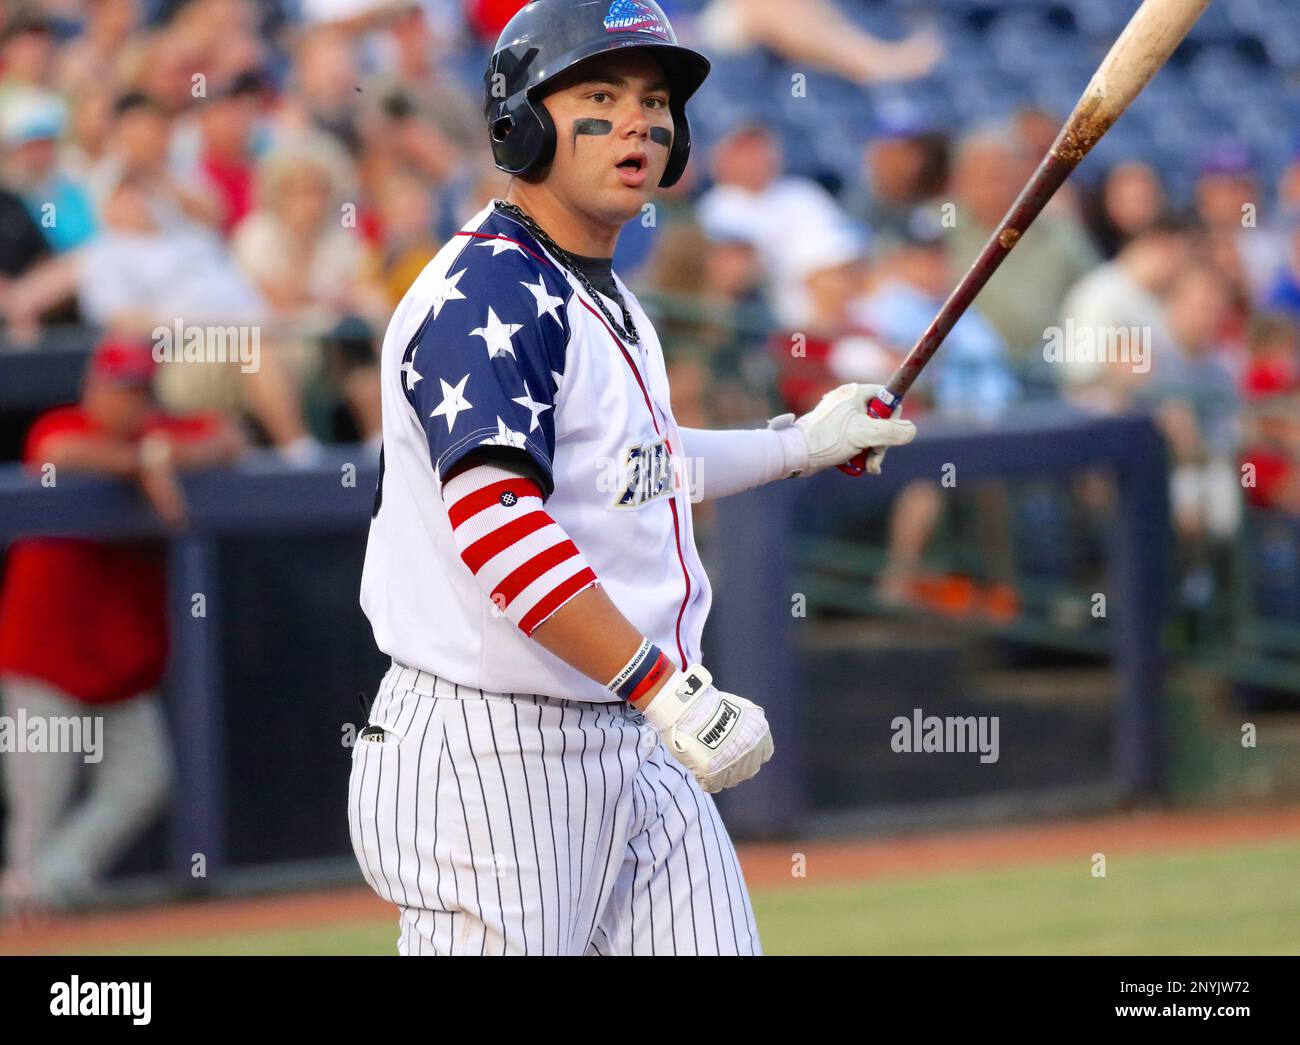 July 5, 2017 - Trenton, New Jersey, U.S - DANTE BICHETTE JR. at bat for the  Trenton Thunder in tonight's game vs. the Fightin Phils at ARM & HAMMER  Park. (Credit Image: ©